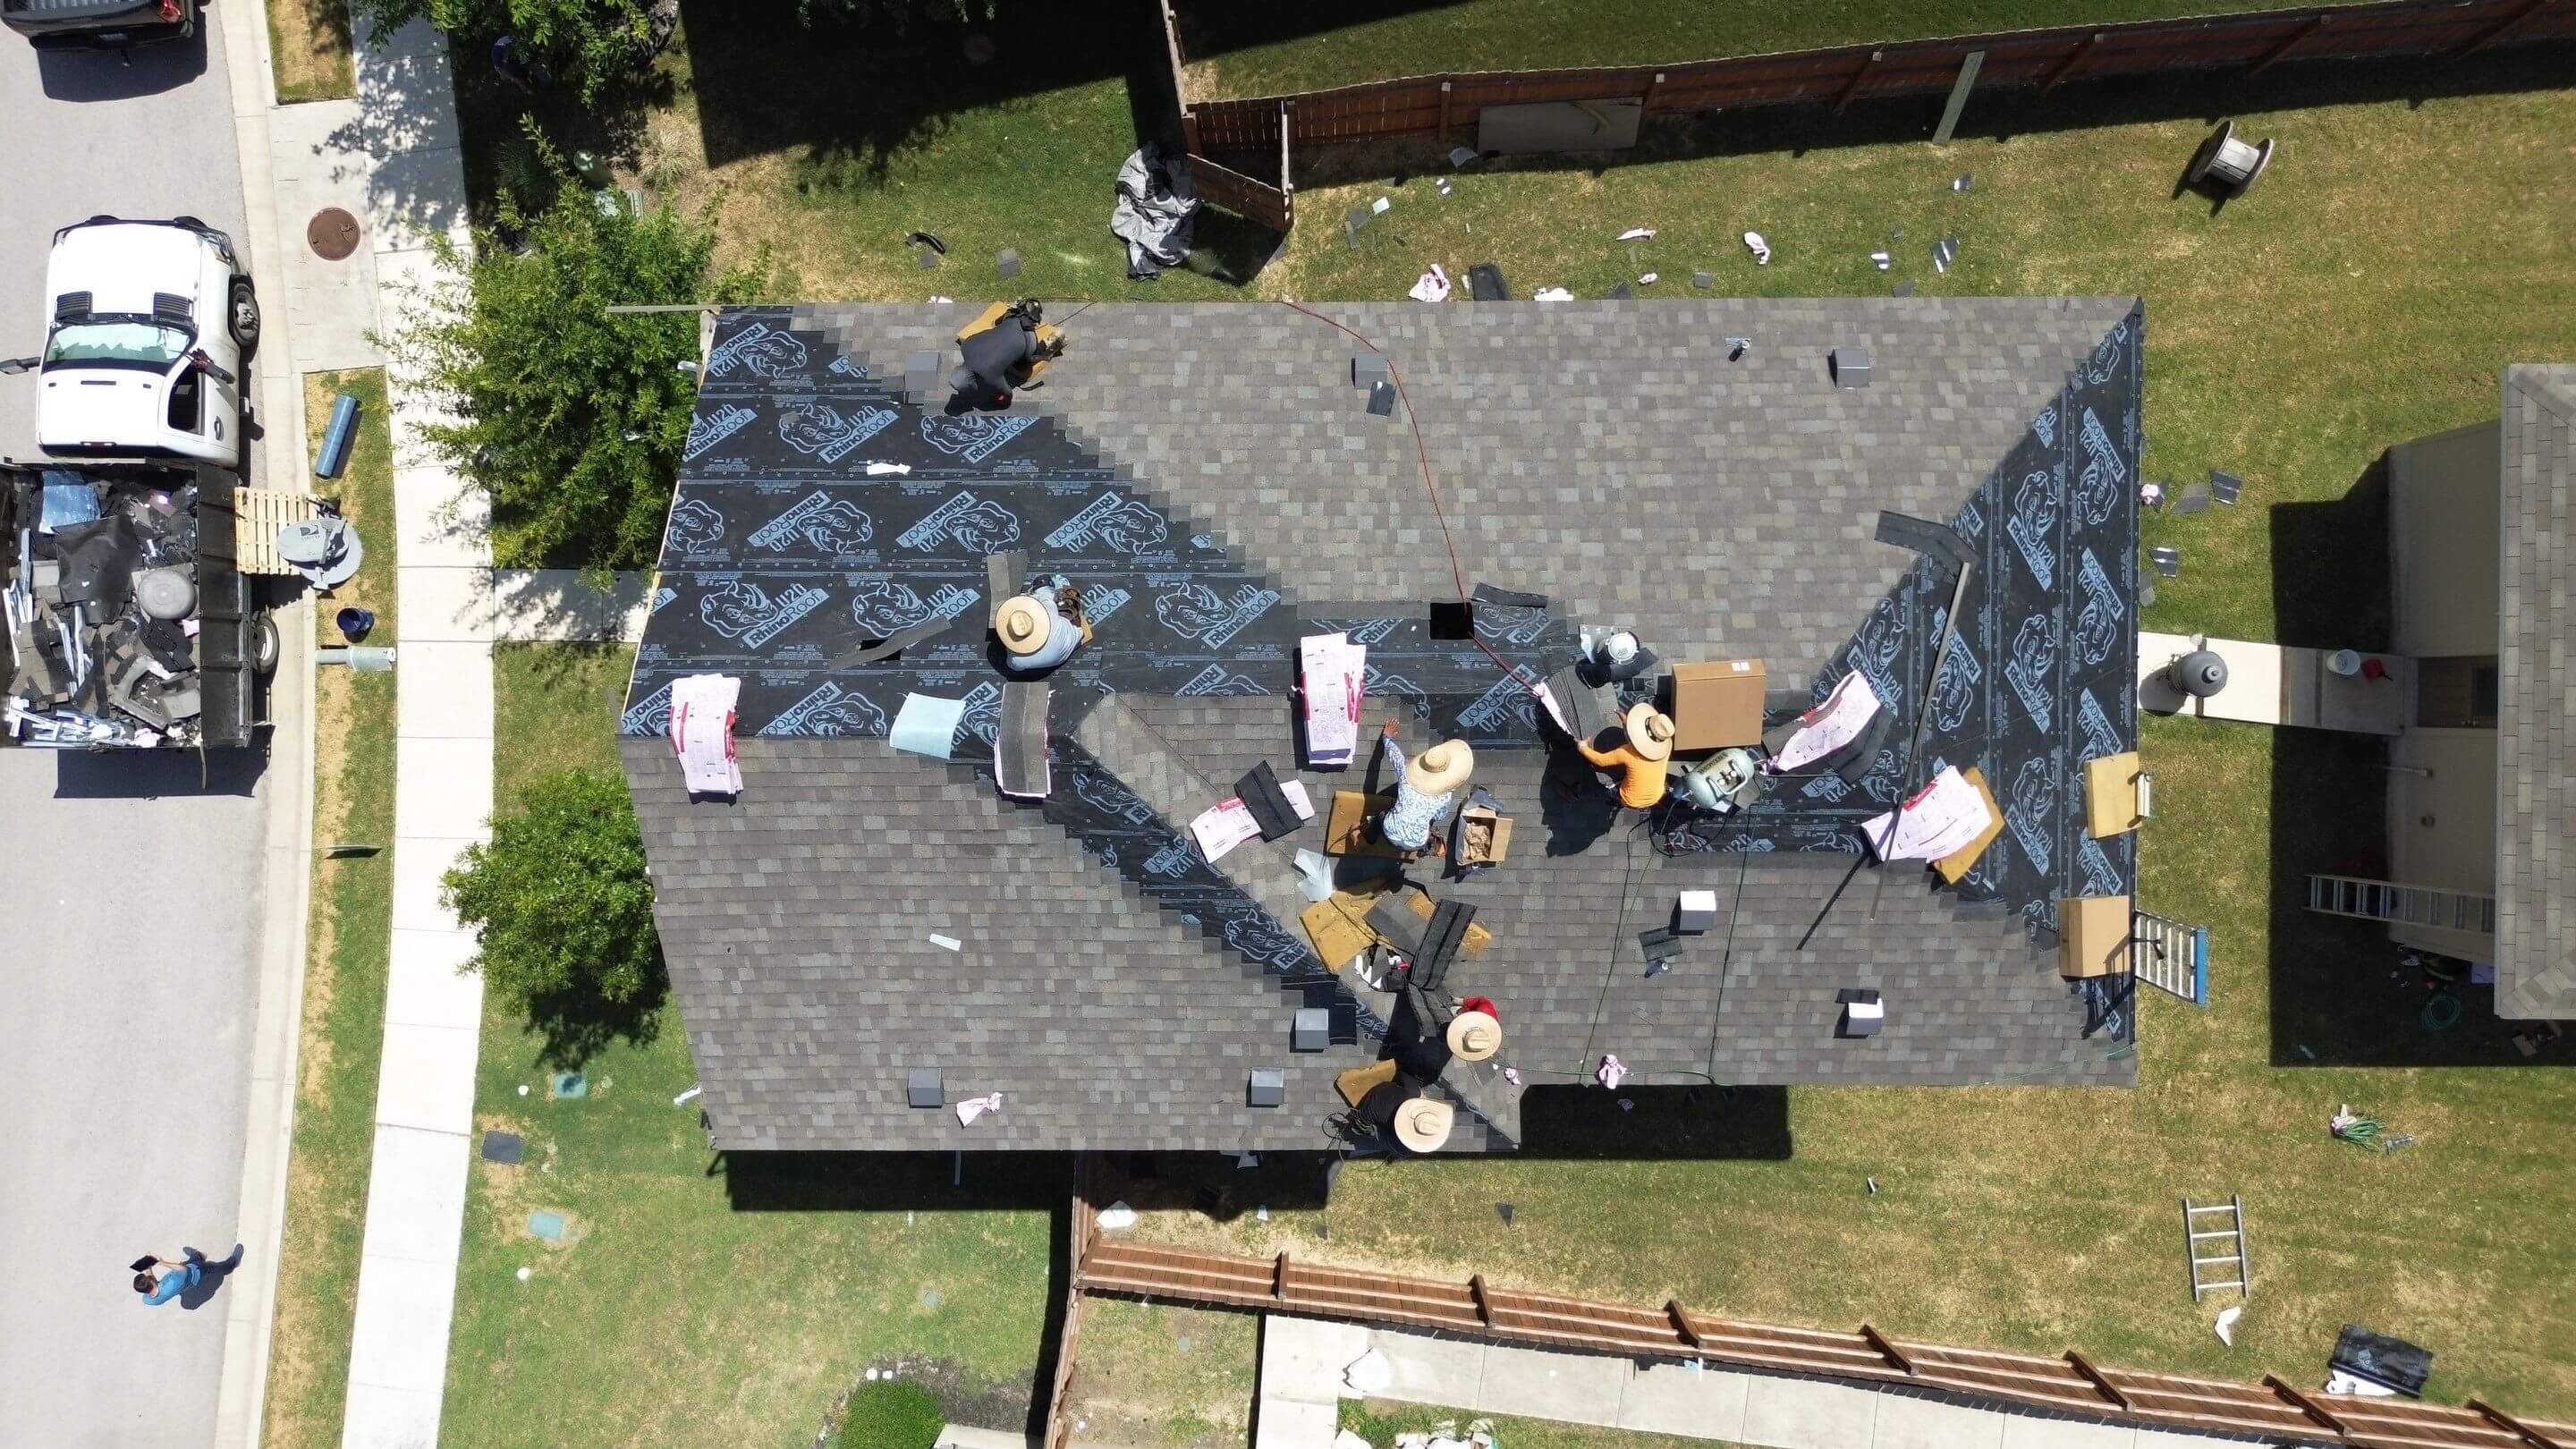 How long does a typical residential roof replacement take?